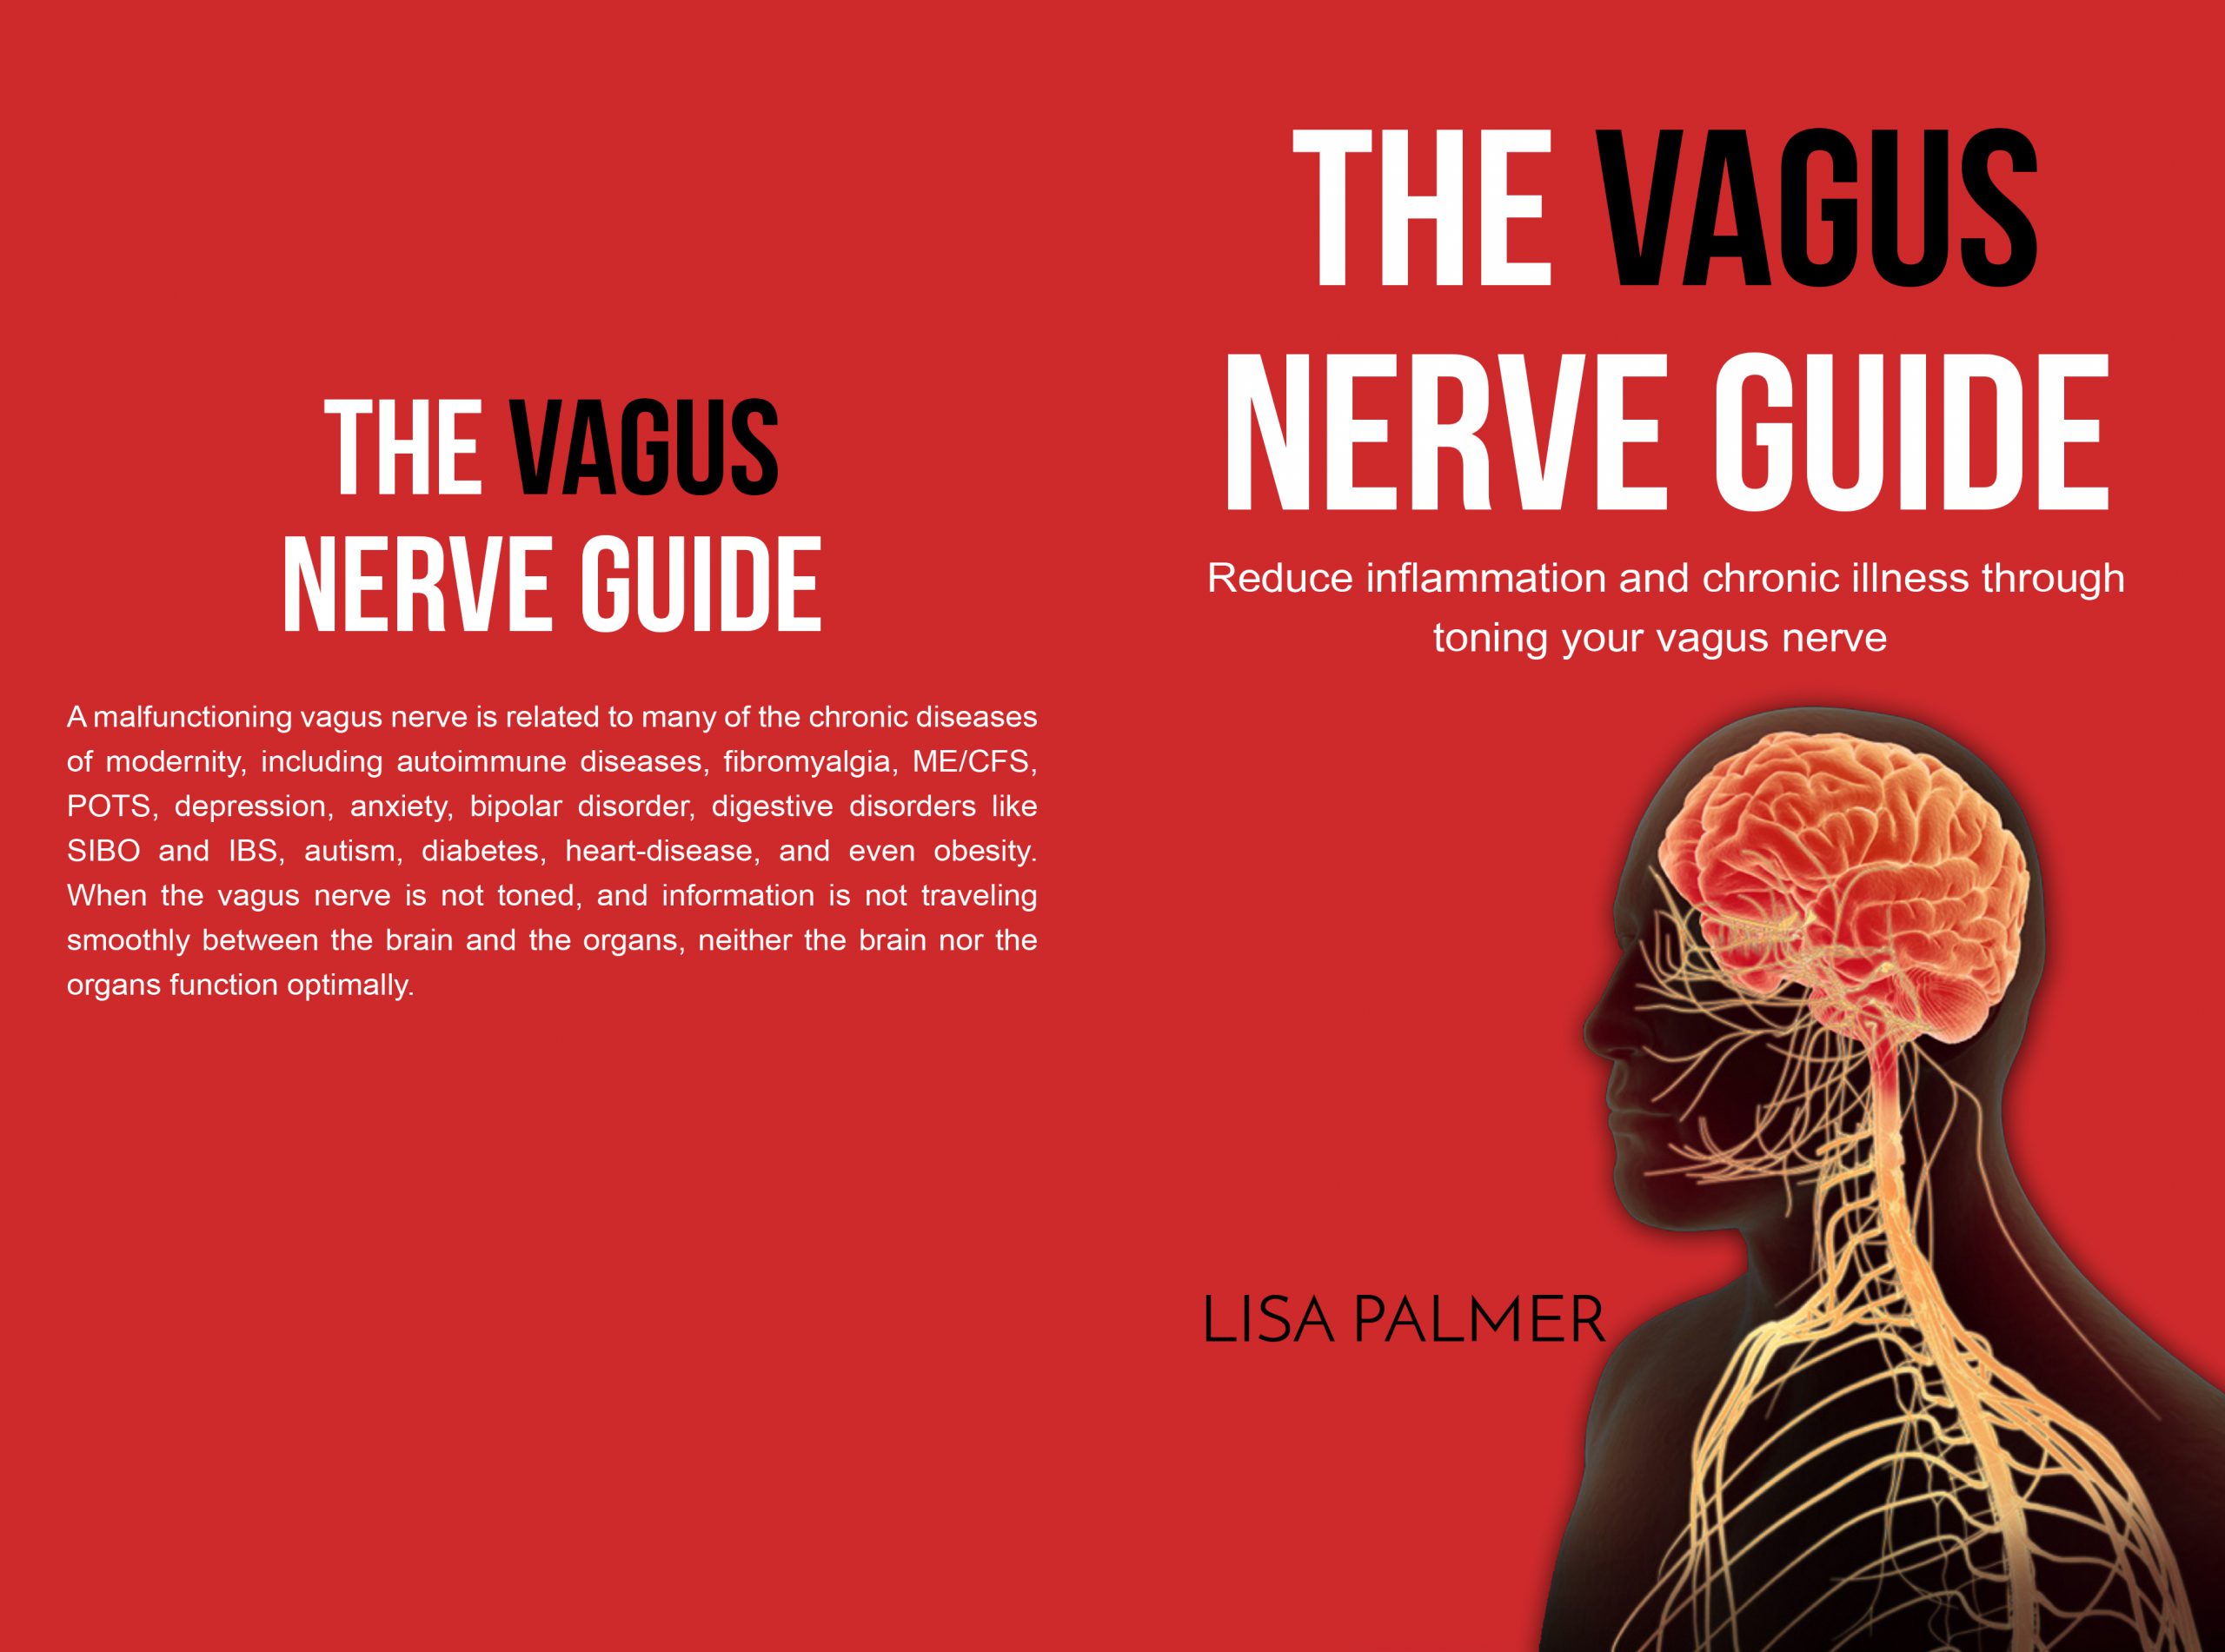 The Vagus Nerve Guide: Reduce Inflammation and Chronic Illness Through Toning Your Vagus Nerve